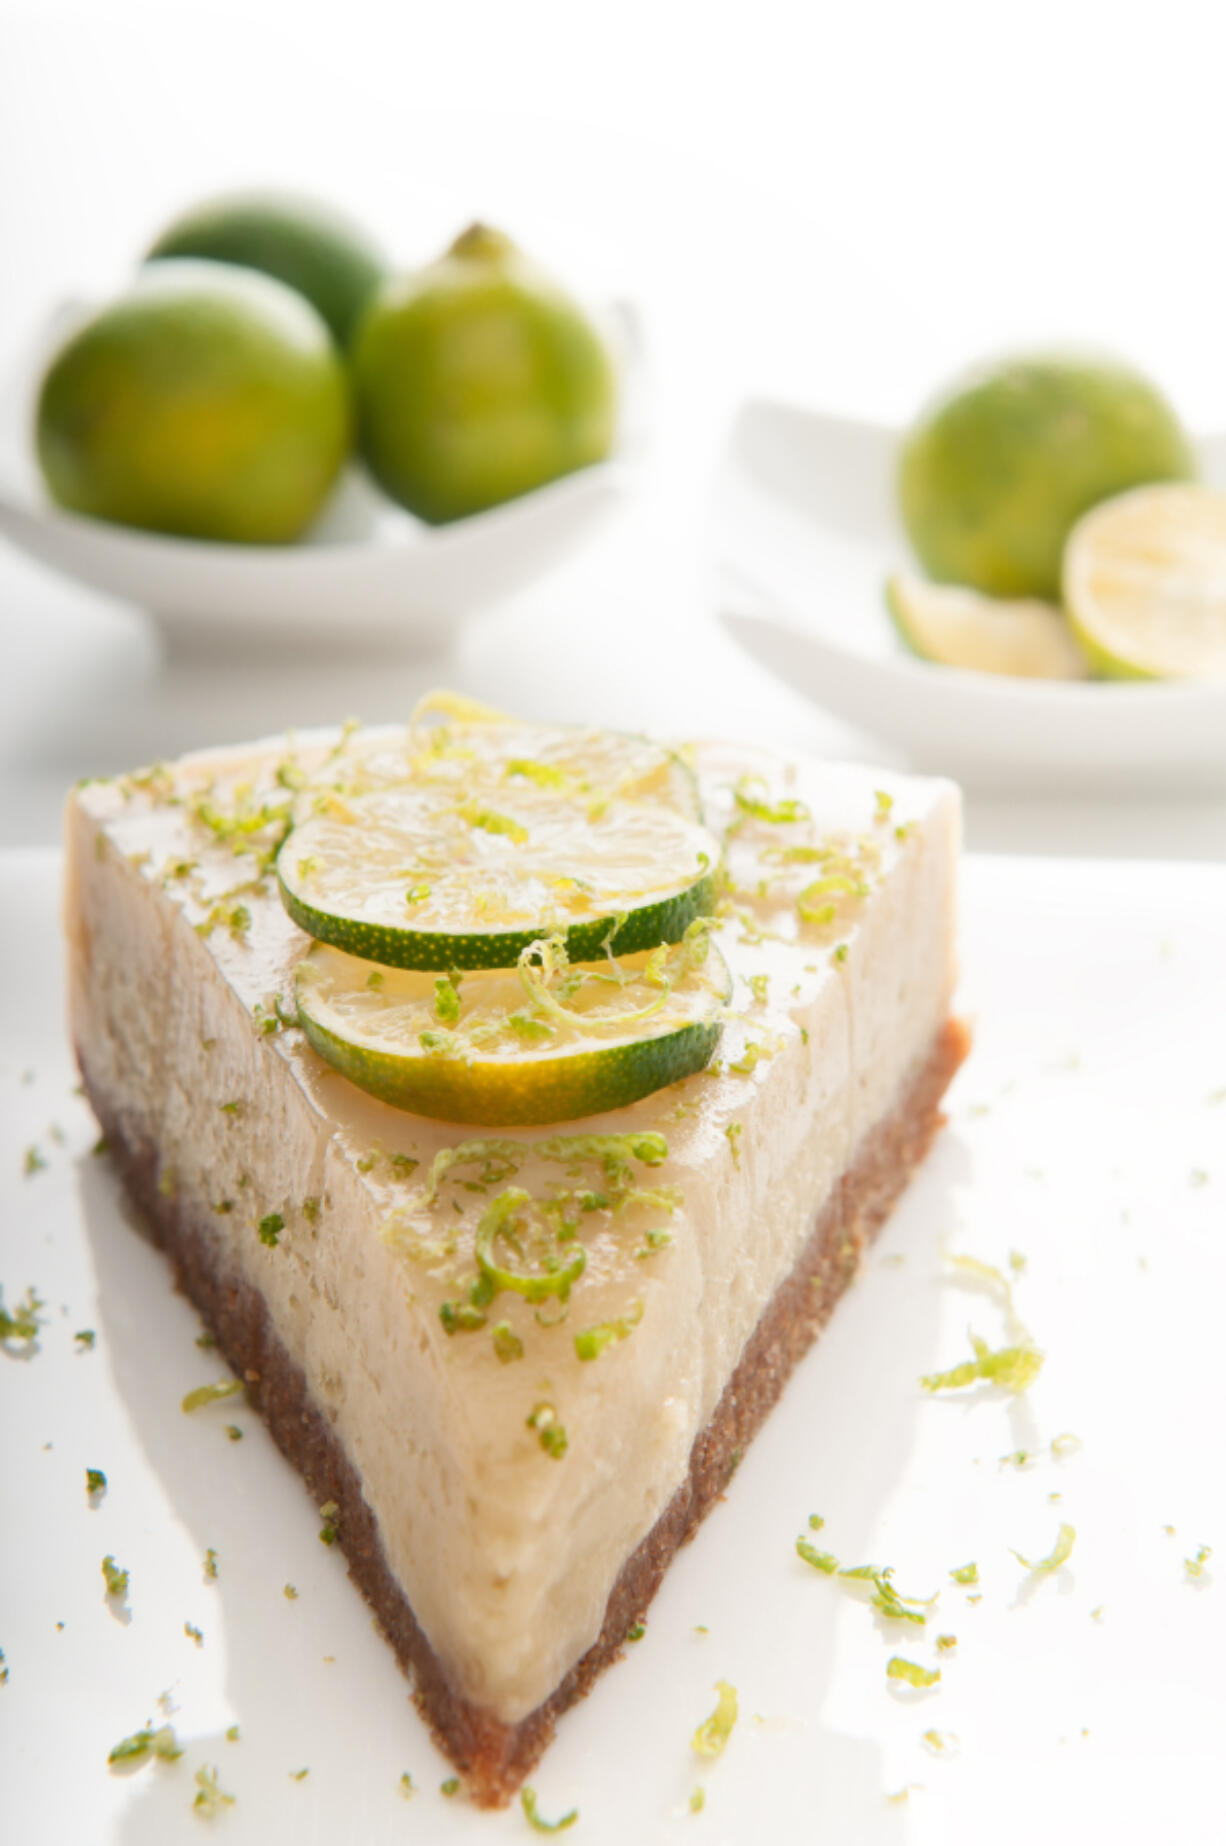 "A slice of vegan key lime pie made with limes, cashews, coconut and agave." (iStock.com)